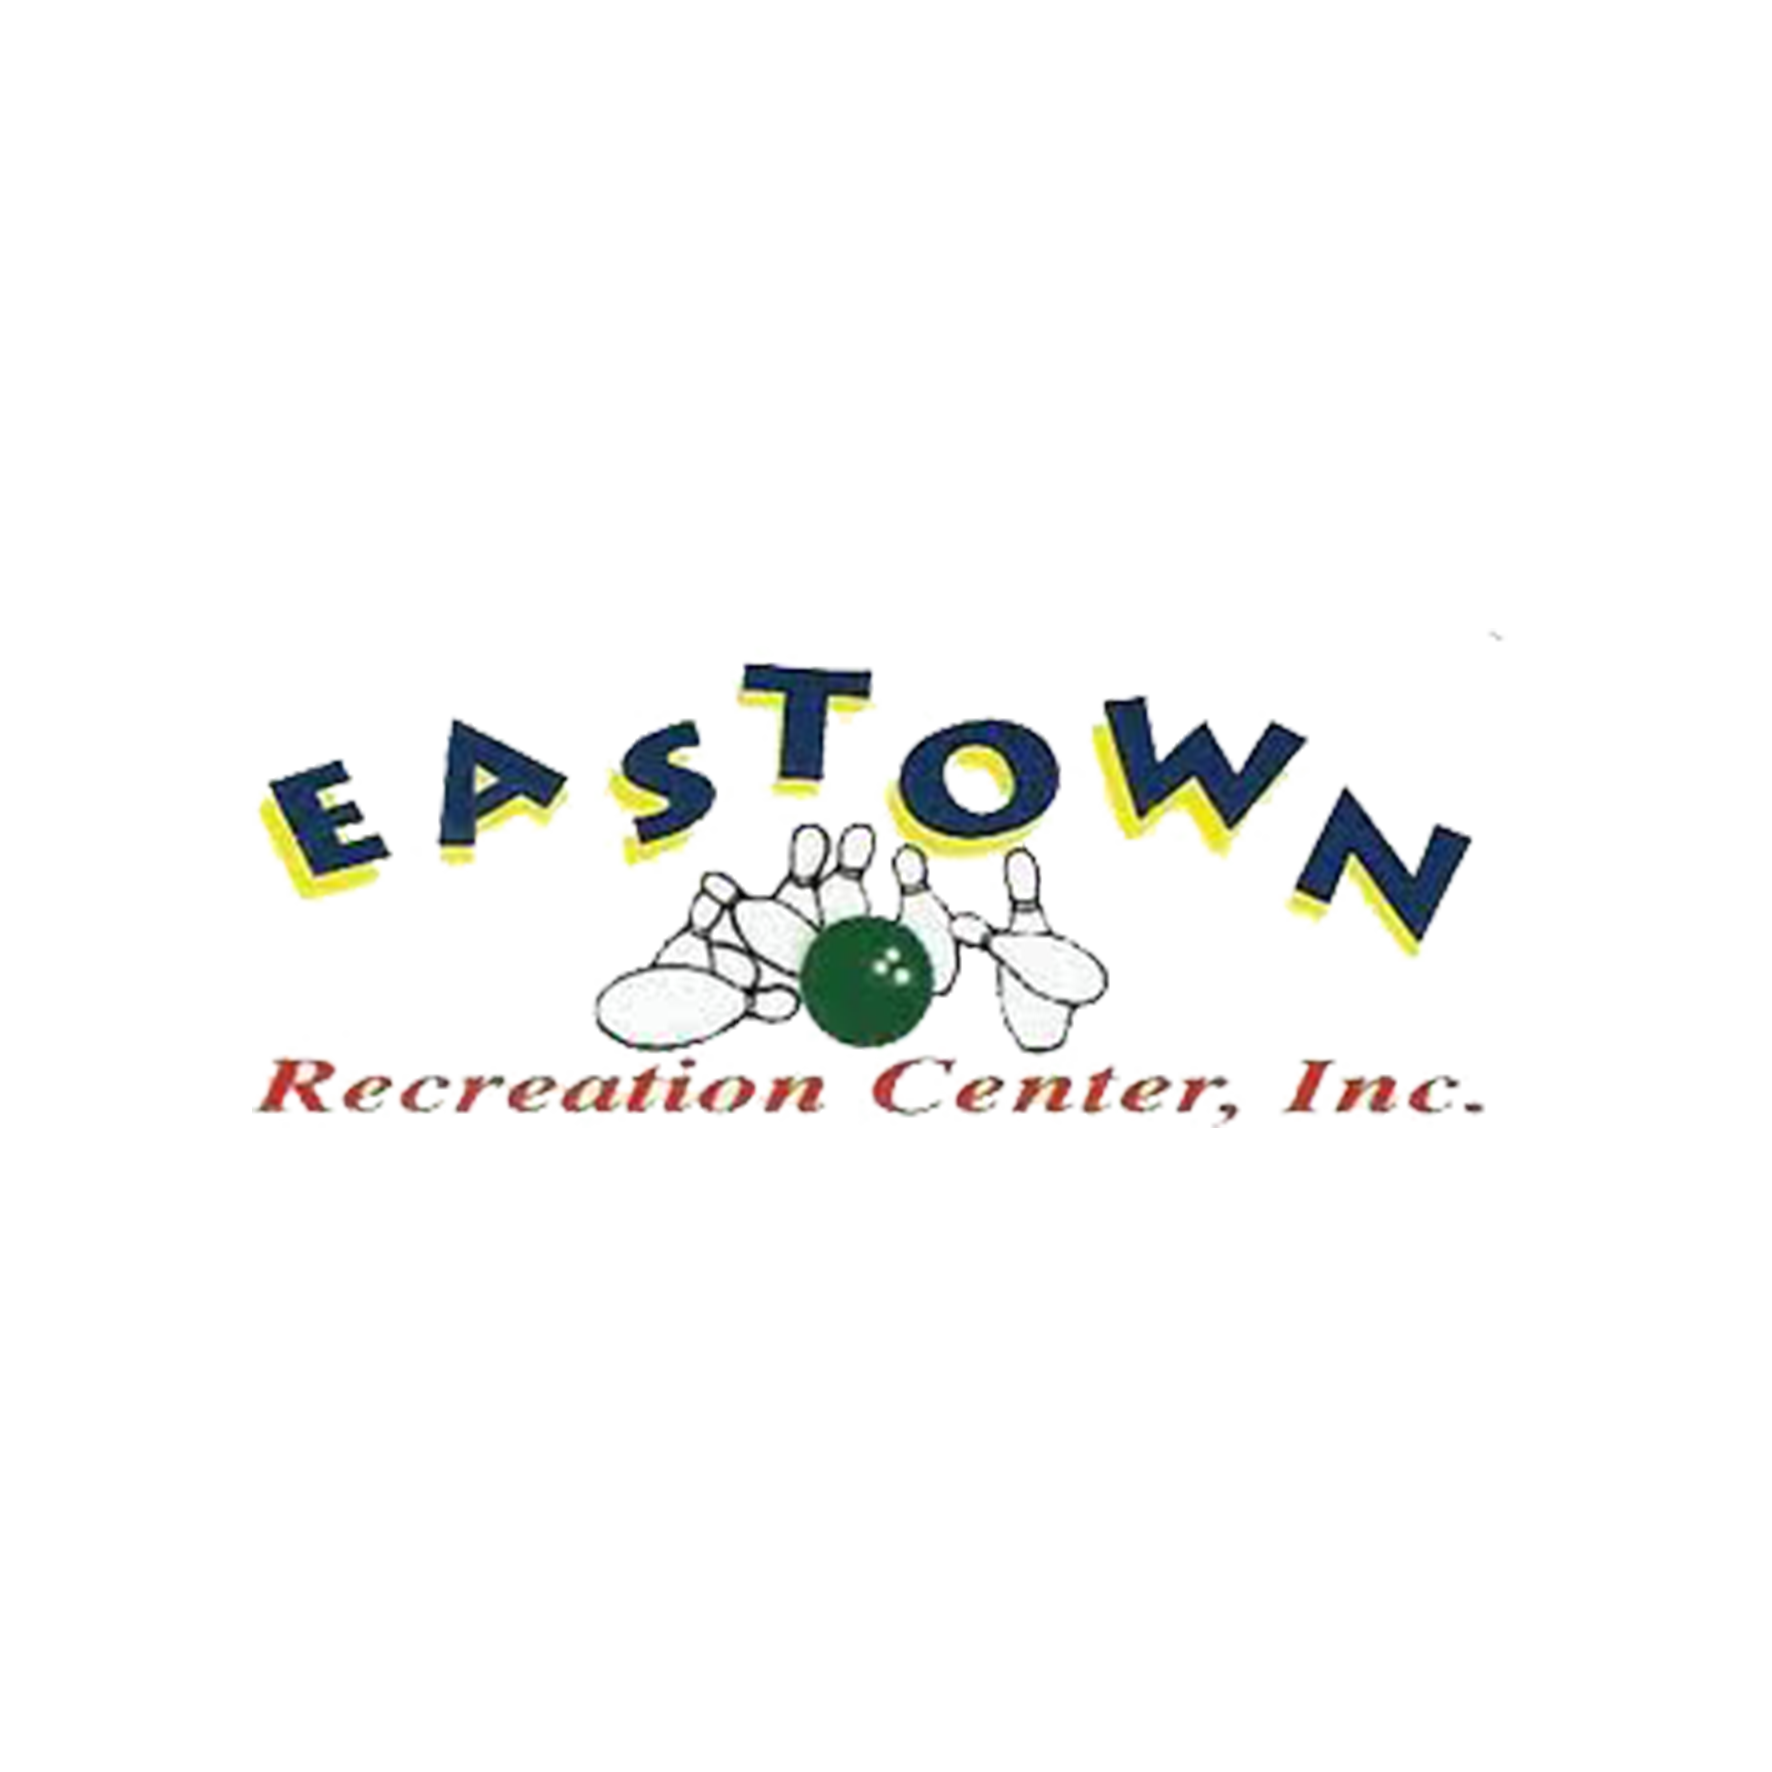 East Town Recreation